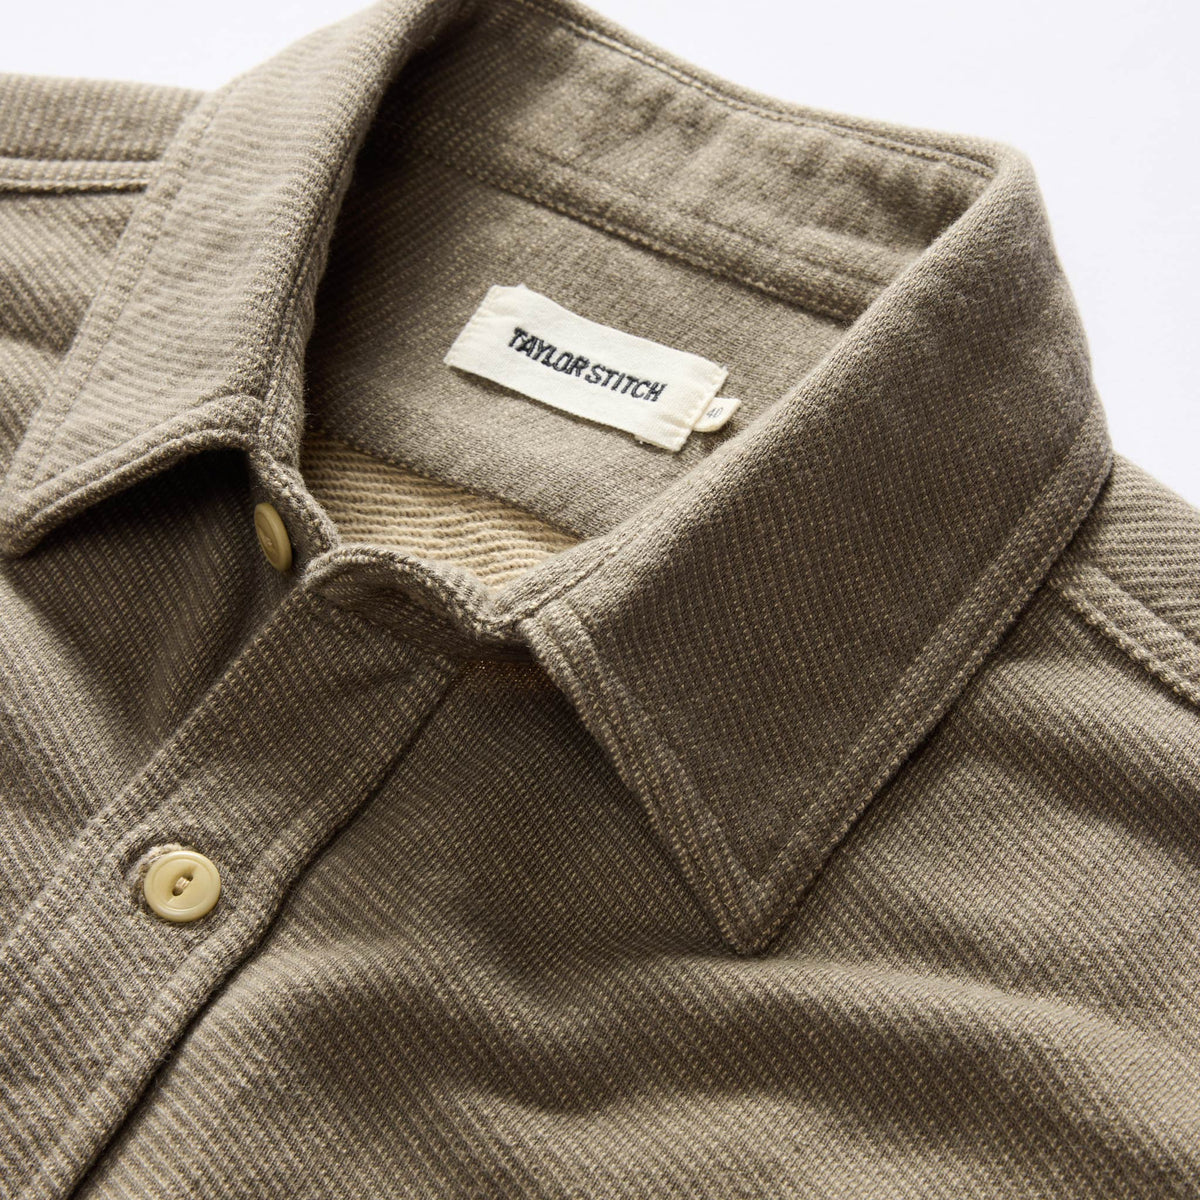 The Utility Shirt in Fatigue Olive French Terry Twill Knit